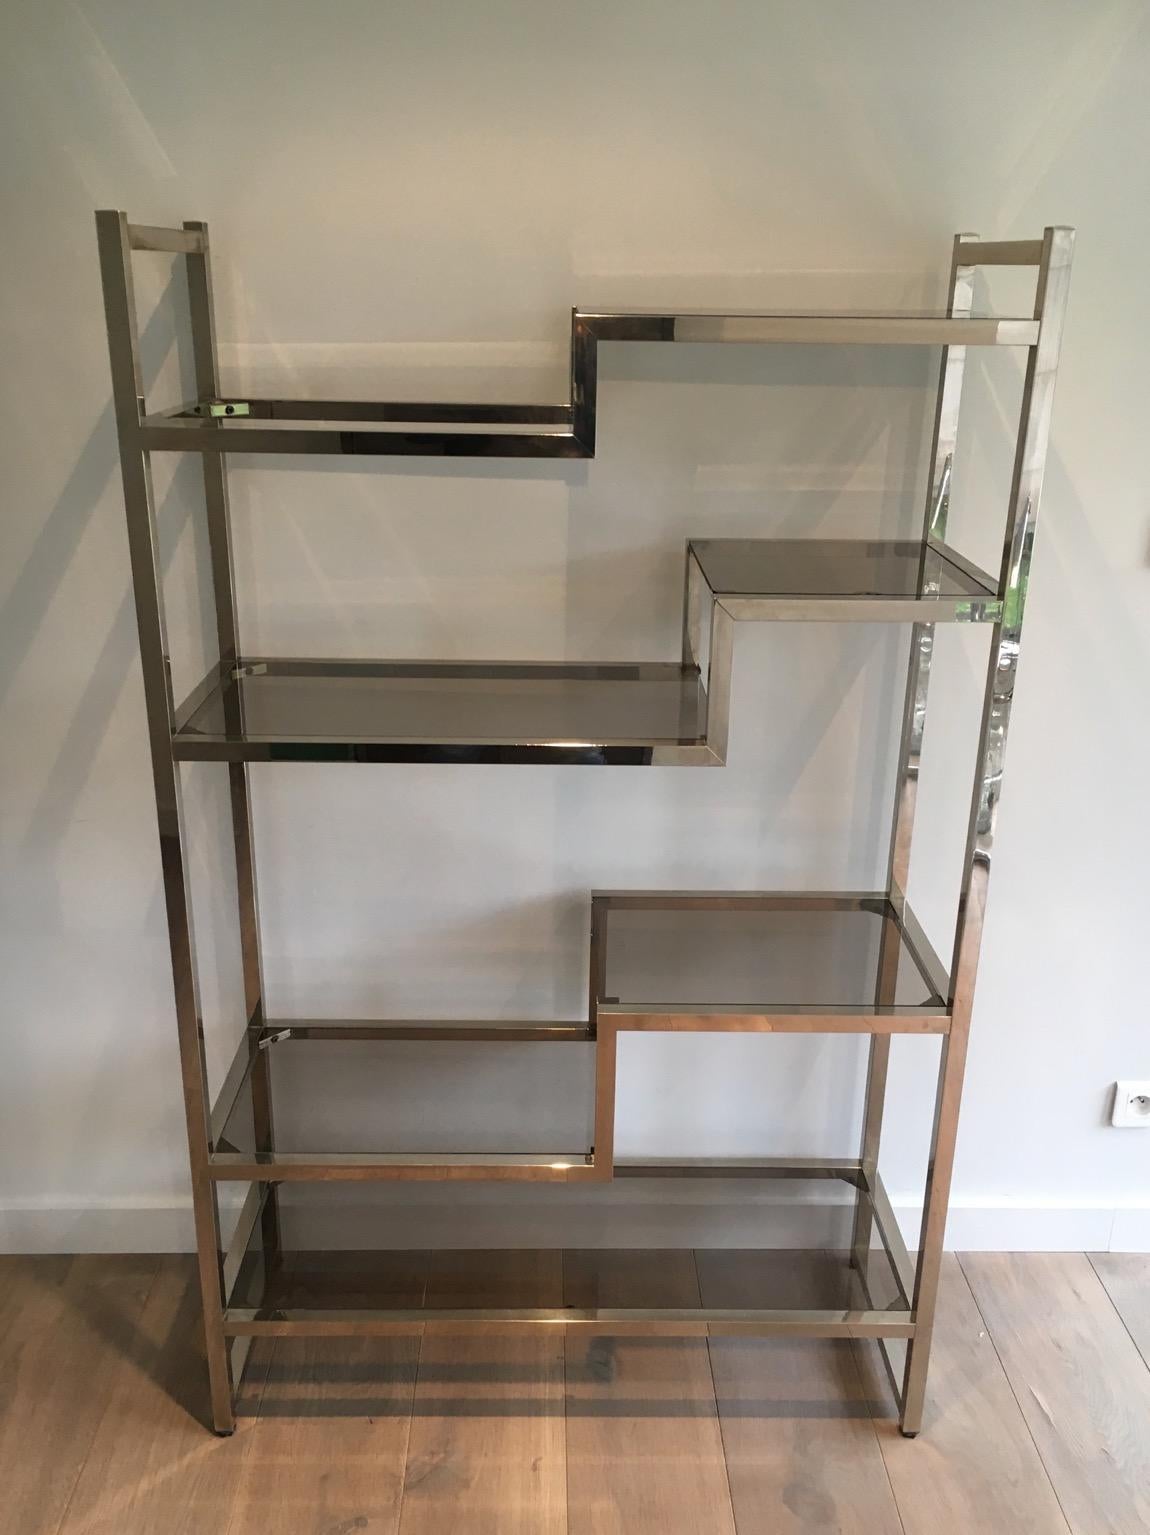 This design shelves unit is made of chrome and smoked glass tops. This is a French work in the style of famous designer Willy Rizzo, circa 1970.